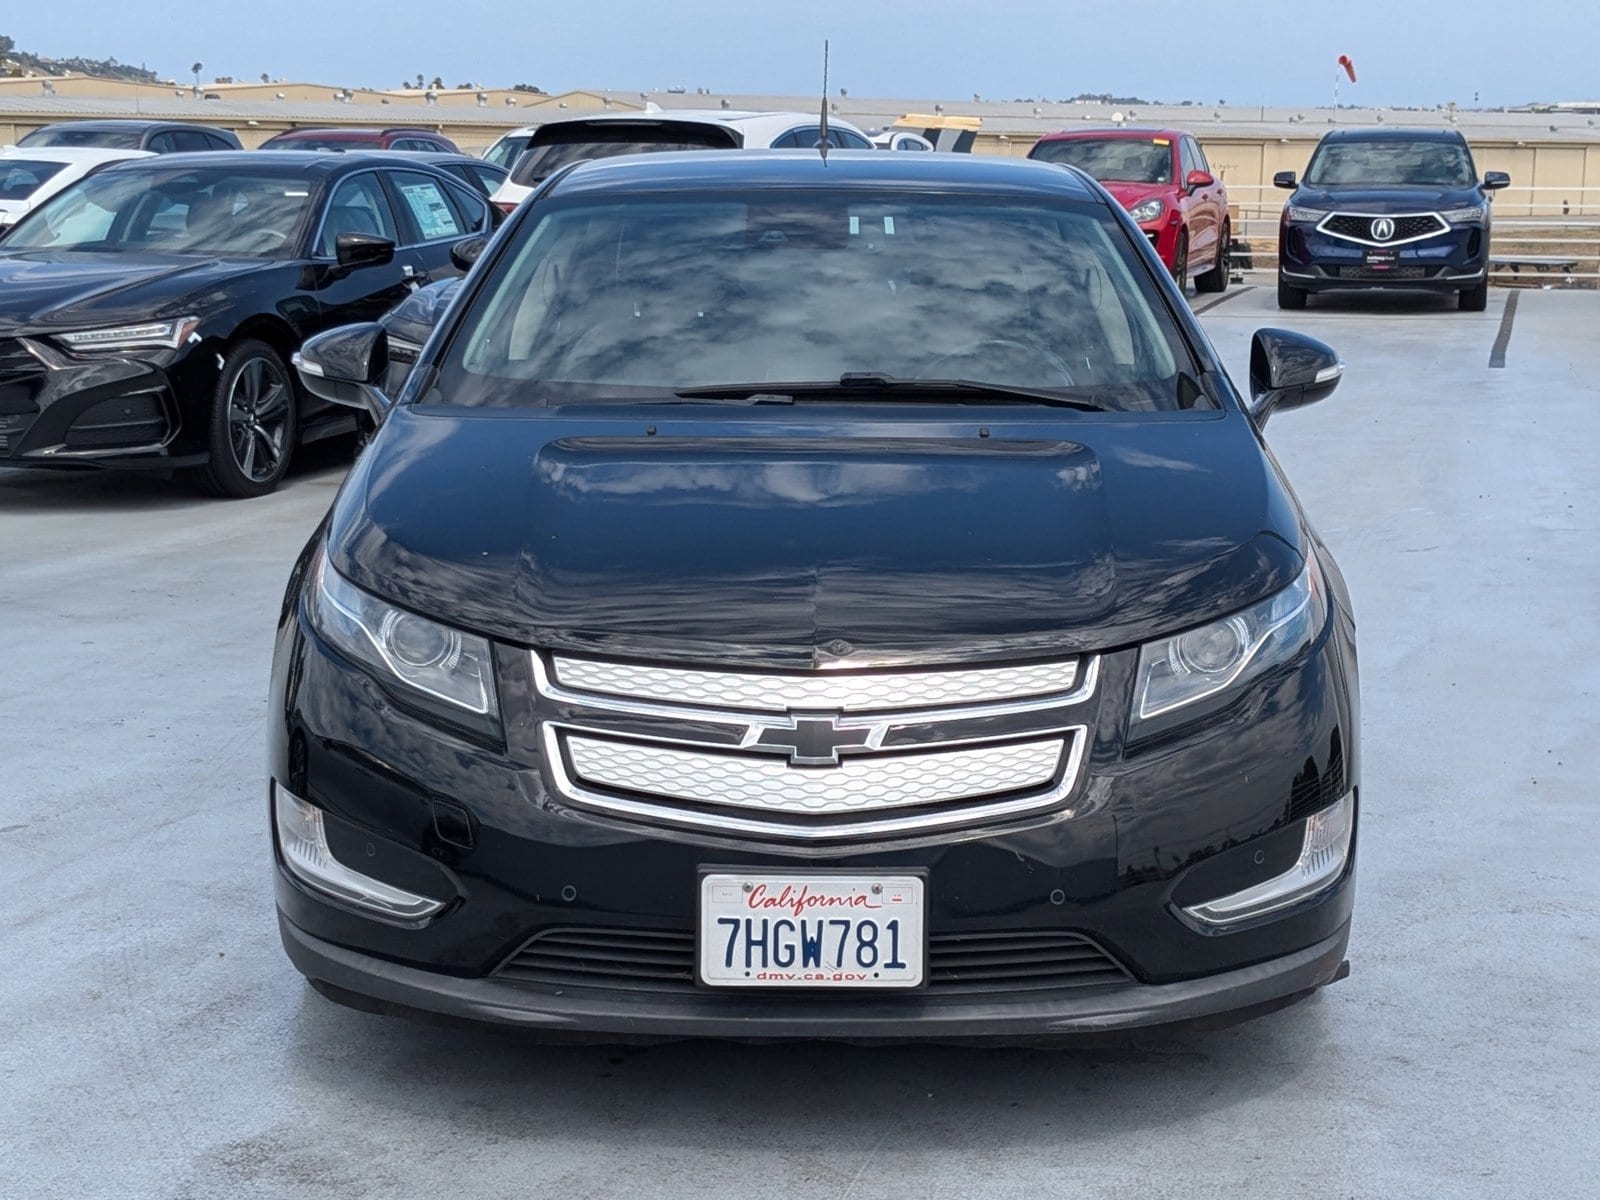 Used 2014 Chevrolet Volt Base with VIN 1G1RH6E45EU162262 for sale in Torrance, CA